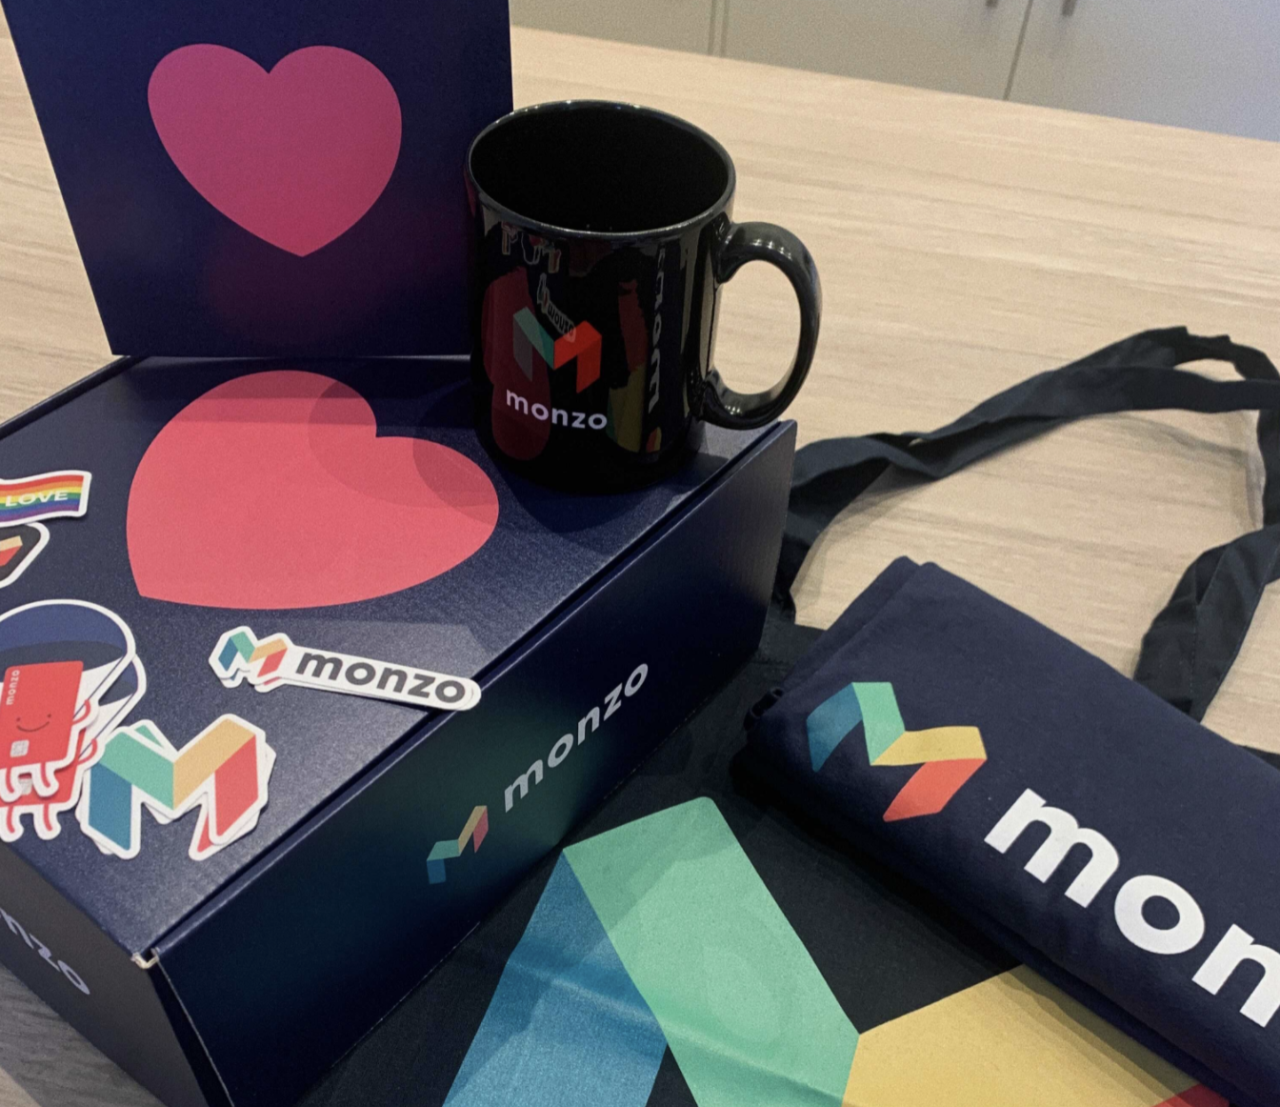 Monzo swag box for new joiners including a mug, t-shirt, and lots of stickers!